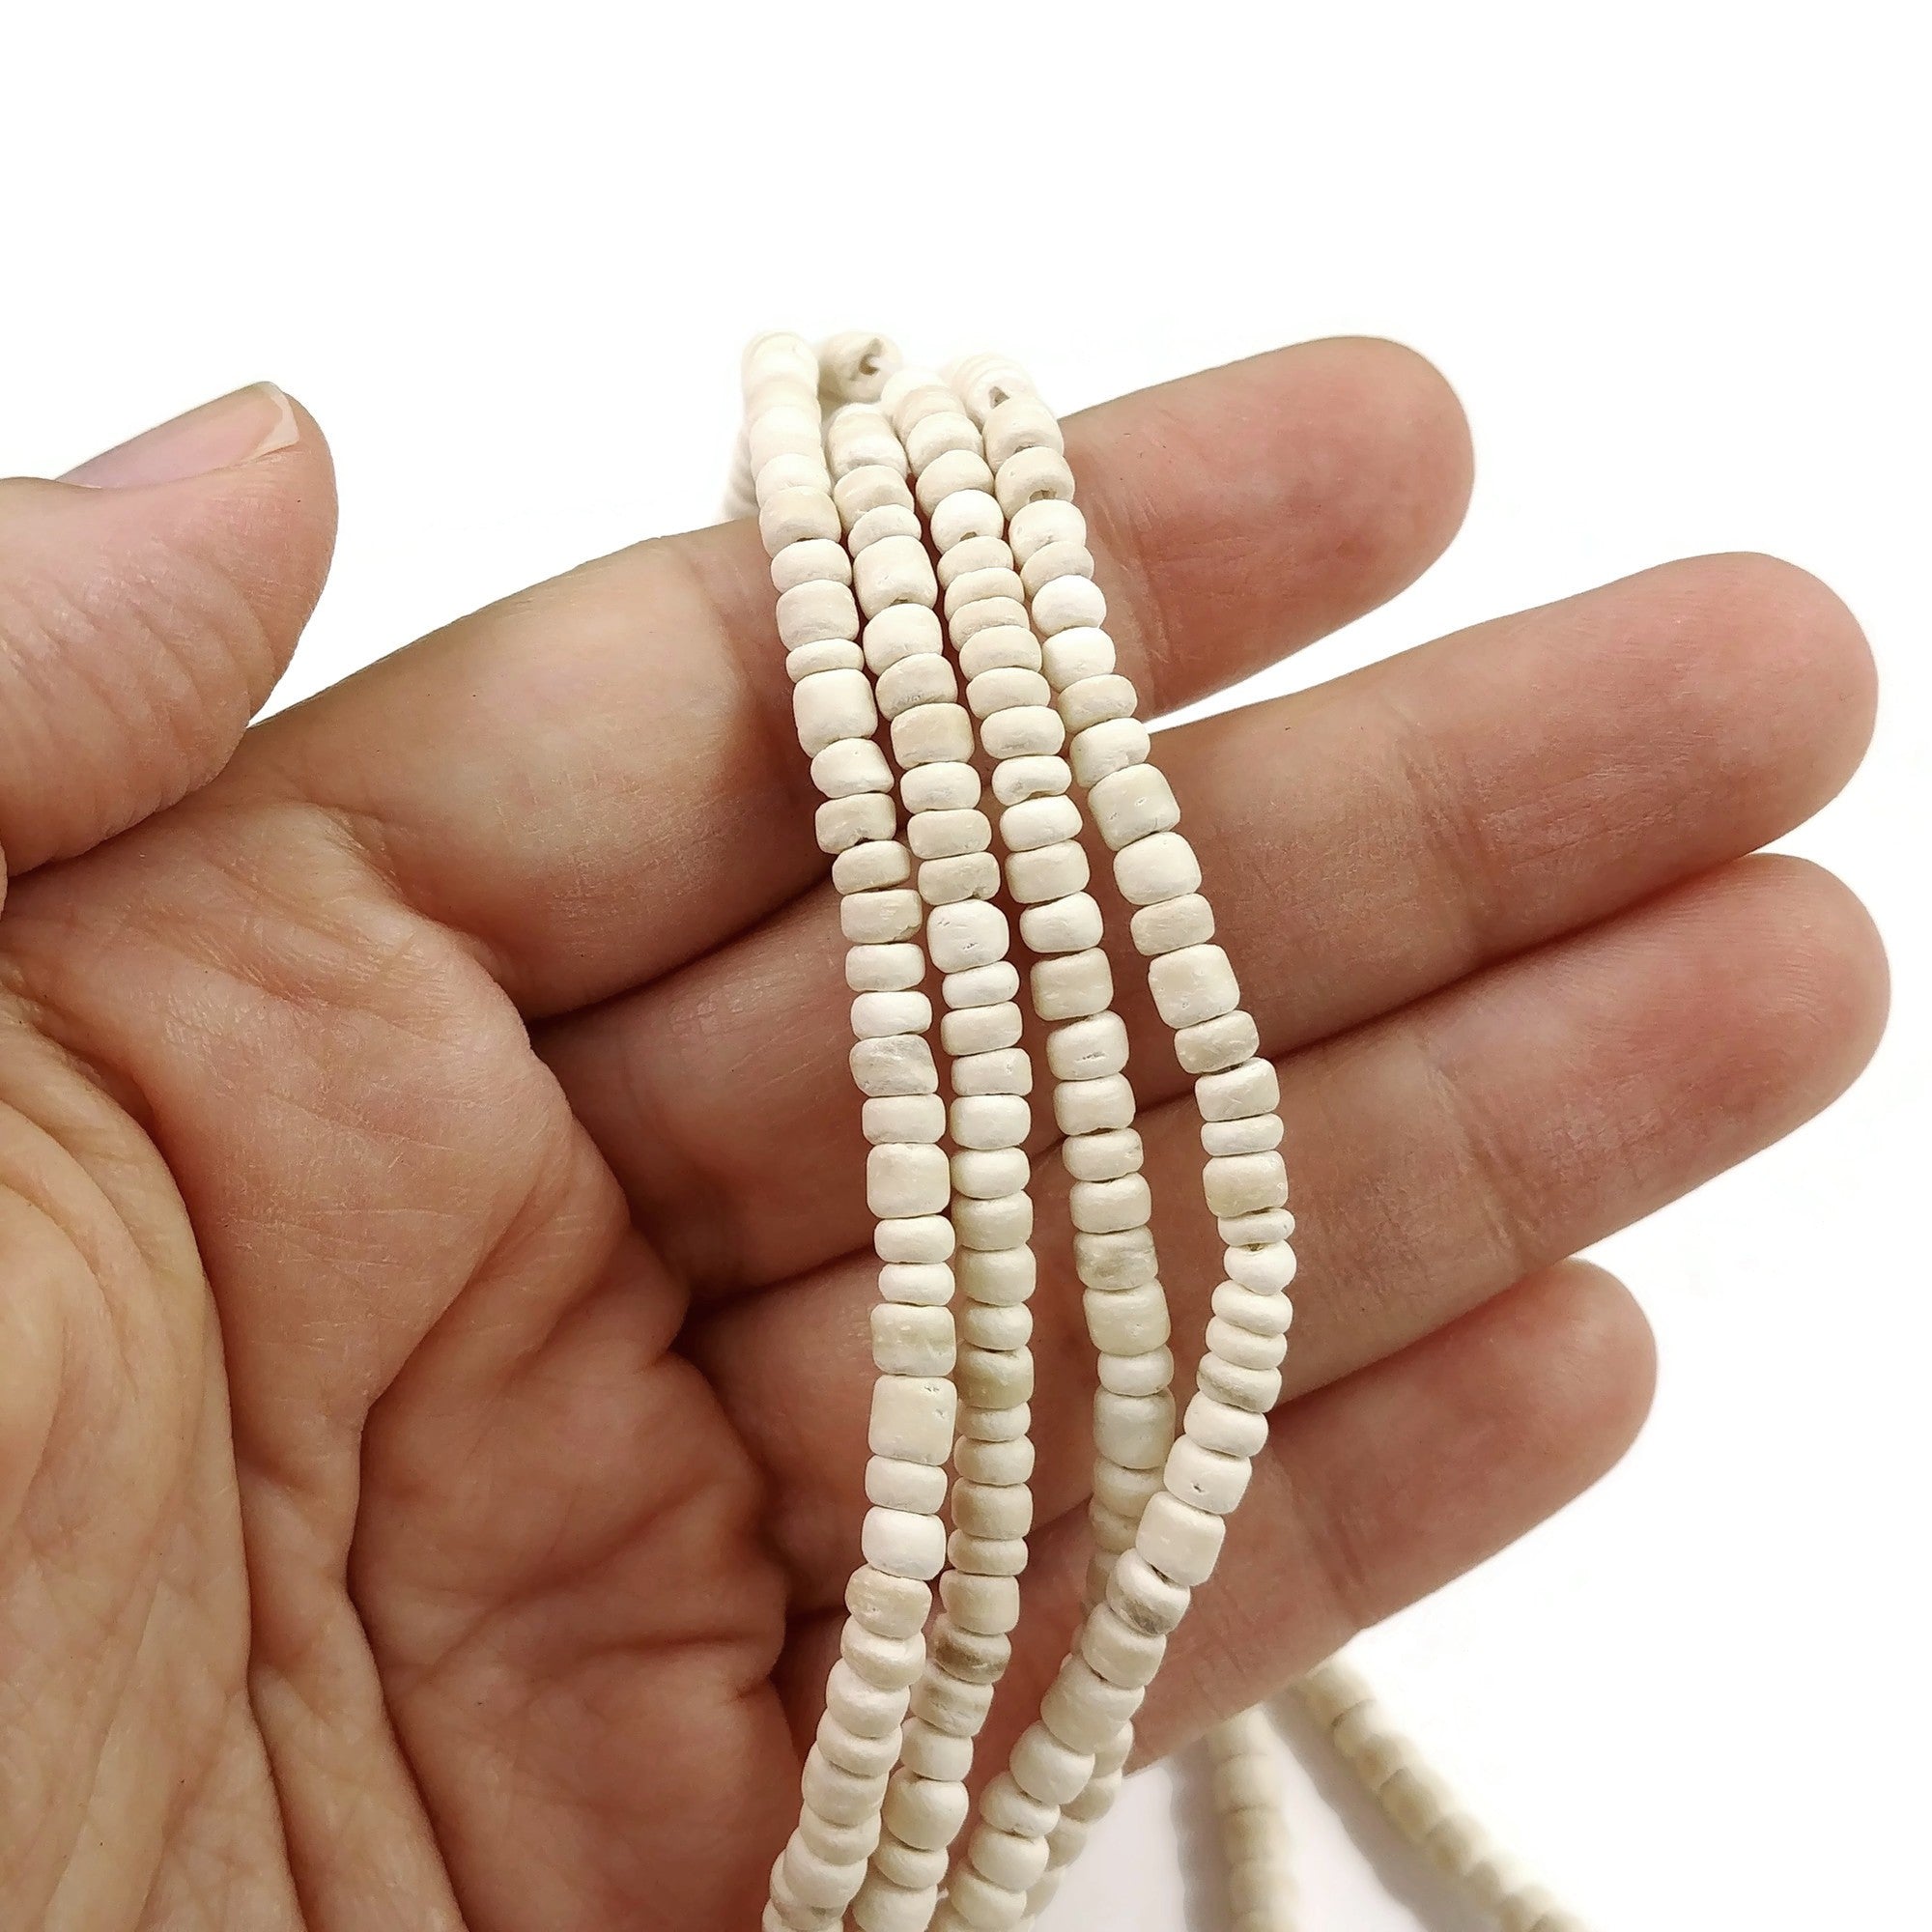 3mm tiny coconut beads - Five colors available